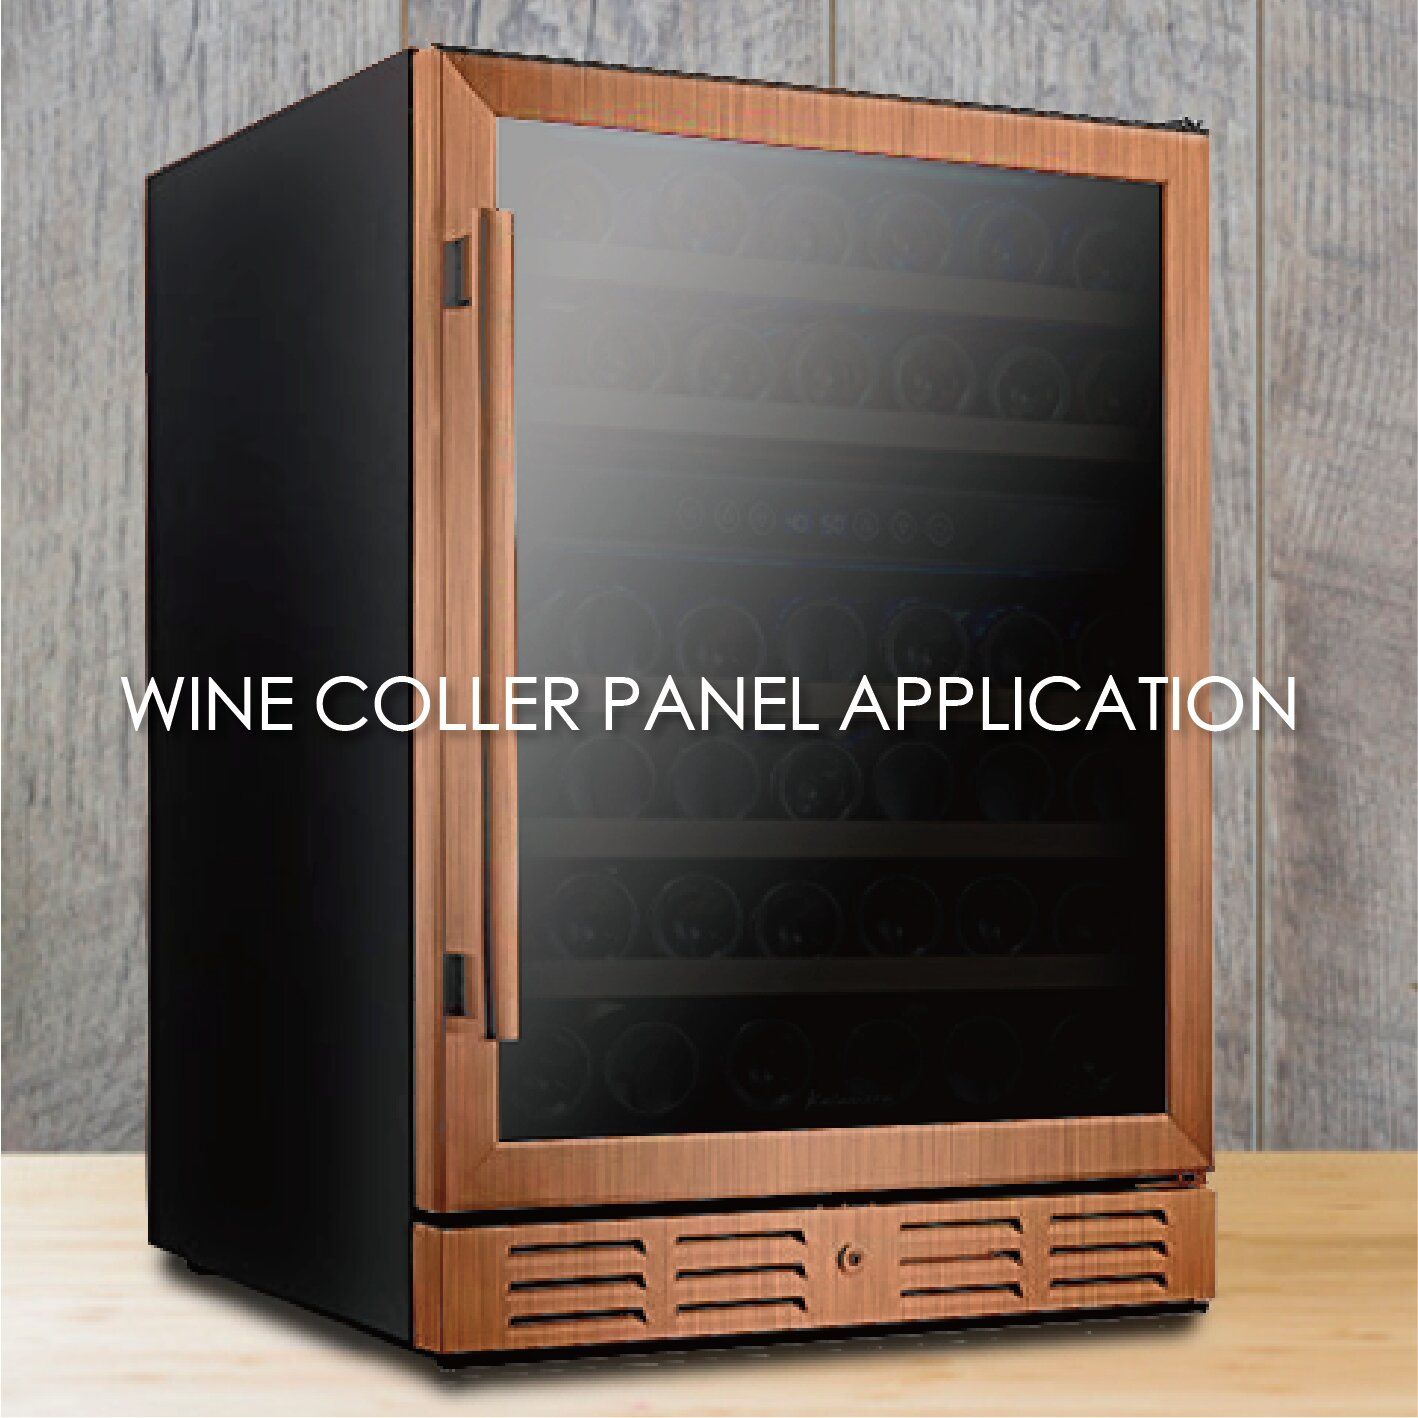 The use of wood grain coated metal to make wine cooler panels can increase the aesthetics and durability